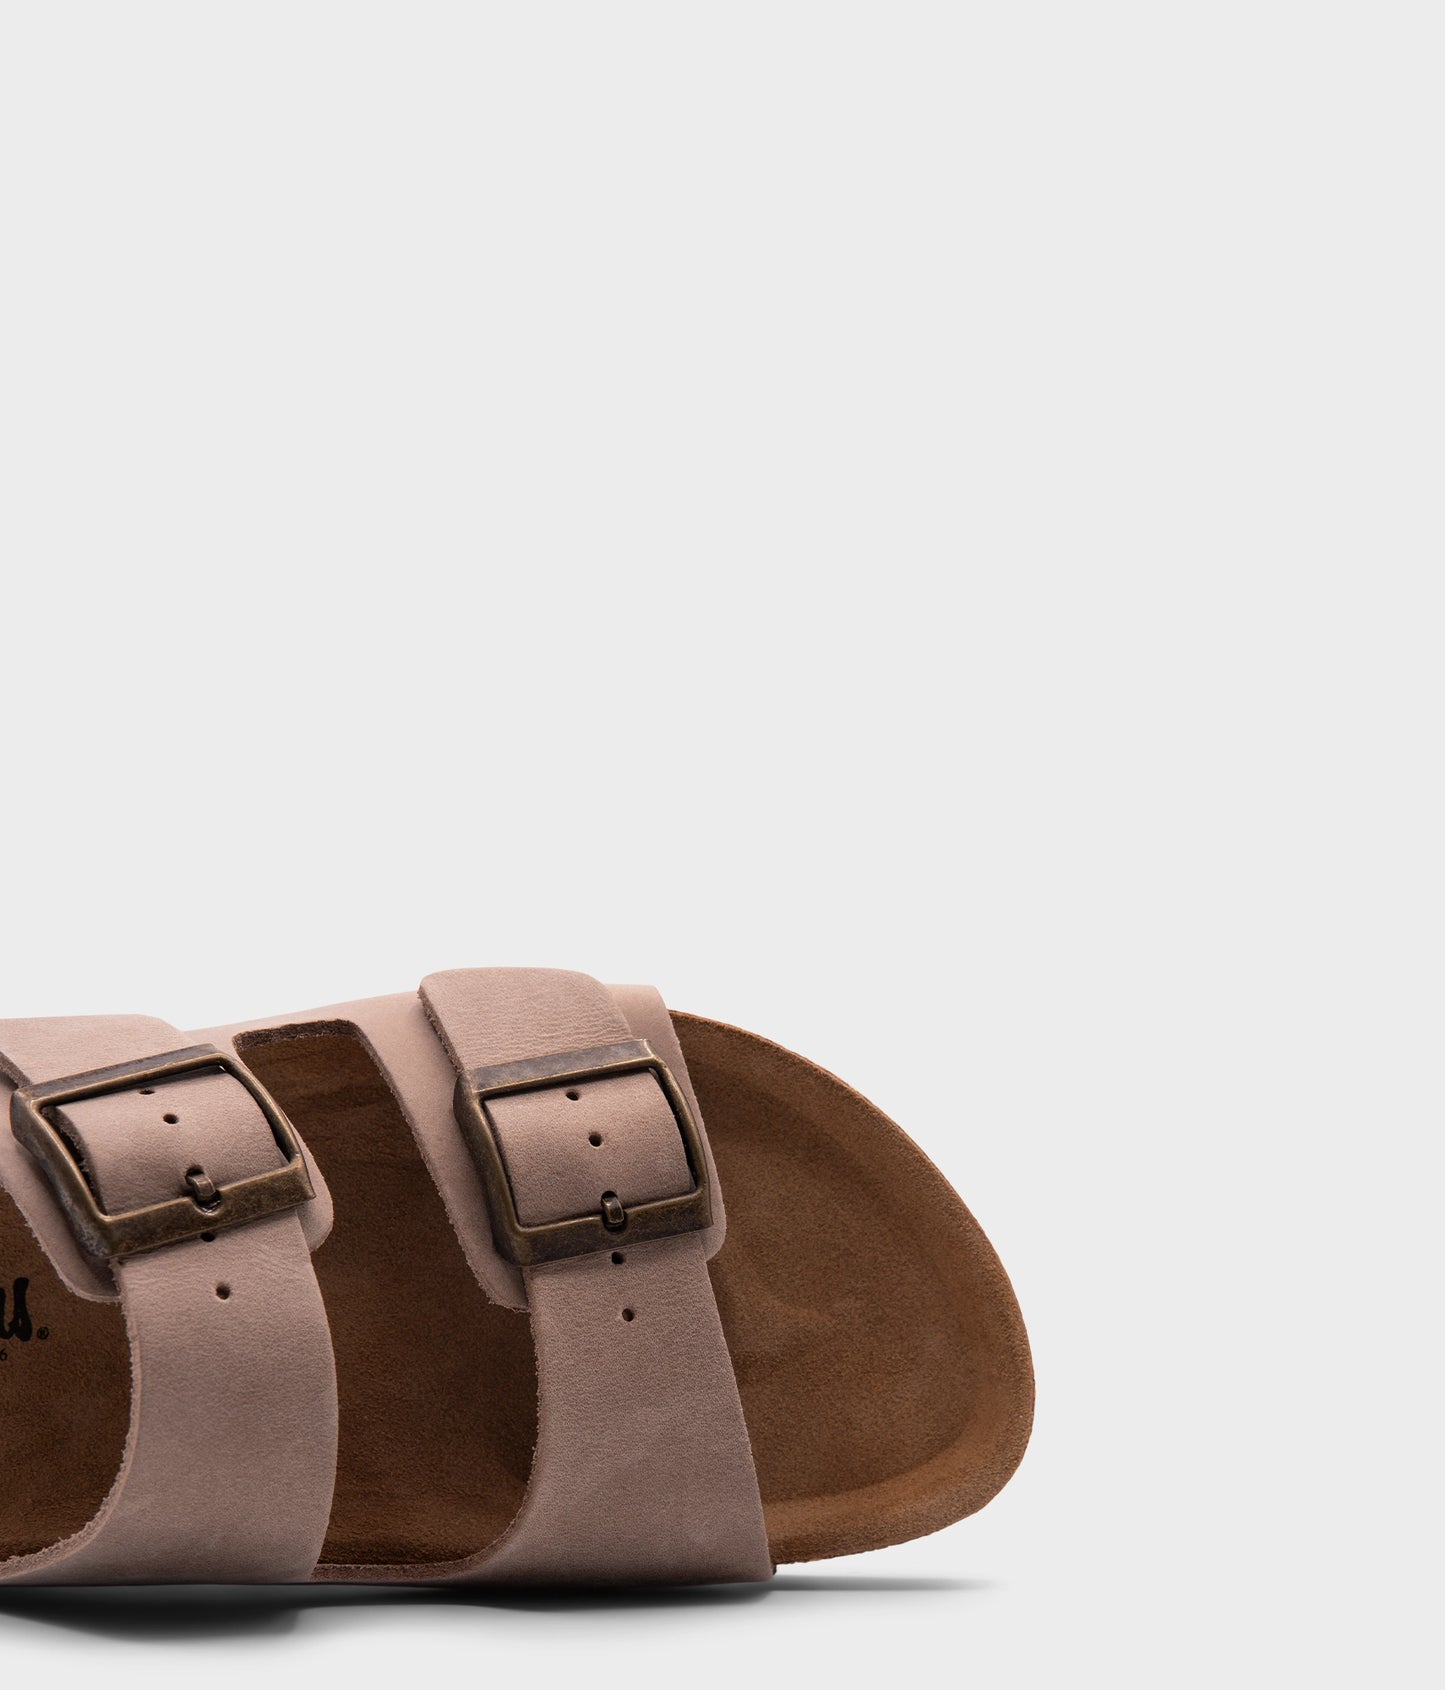 classic cork sandal with two straps in full-grain sand beige nubuck leather, suede footbed and brass gold studs